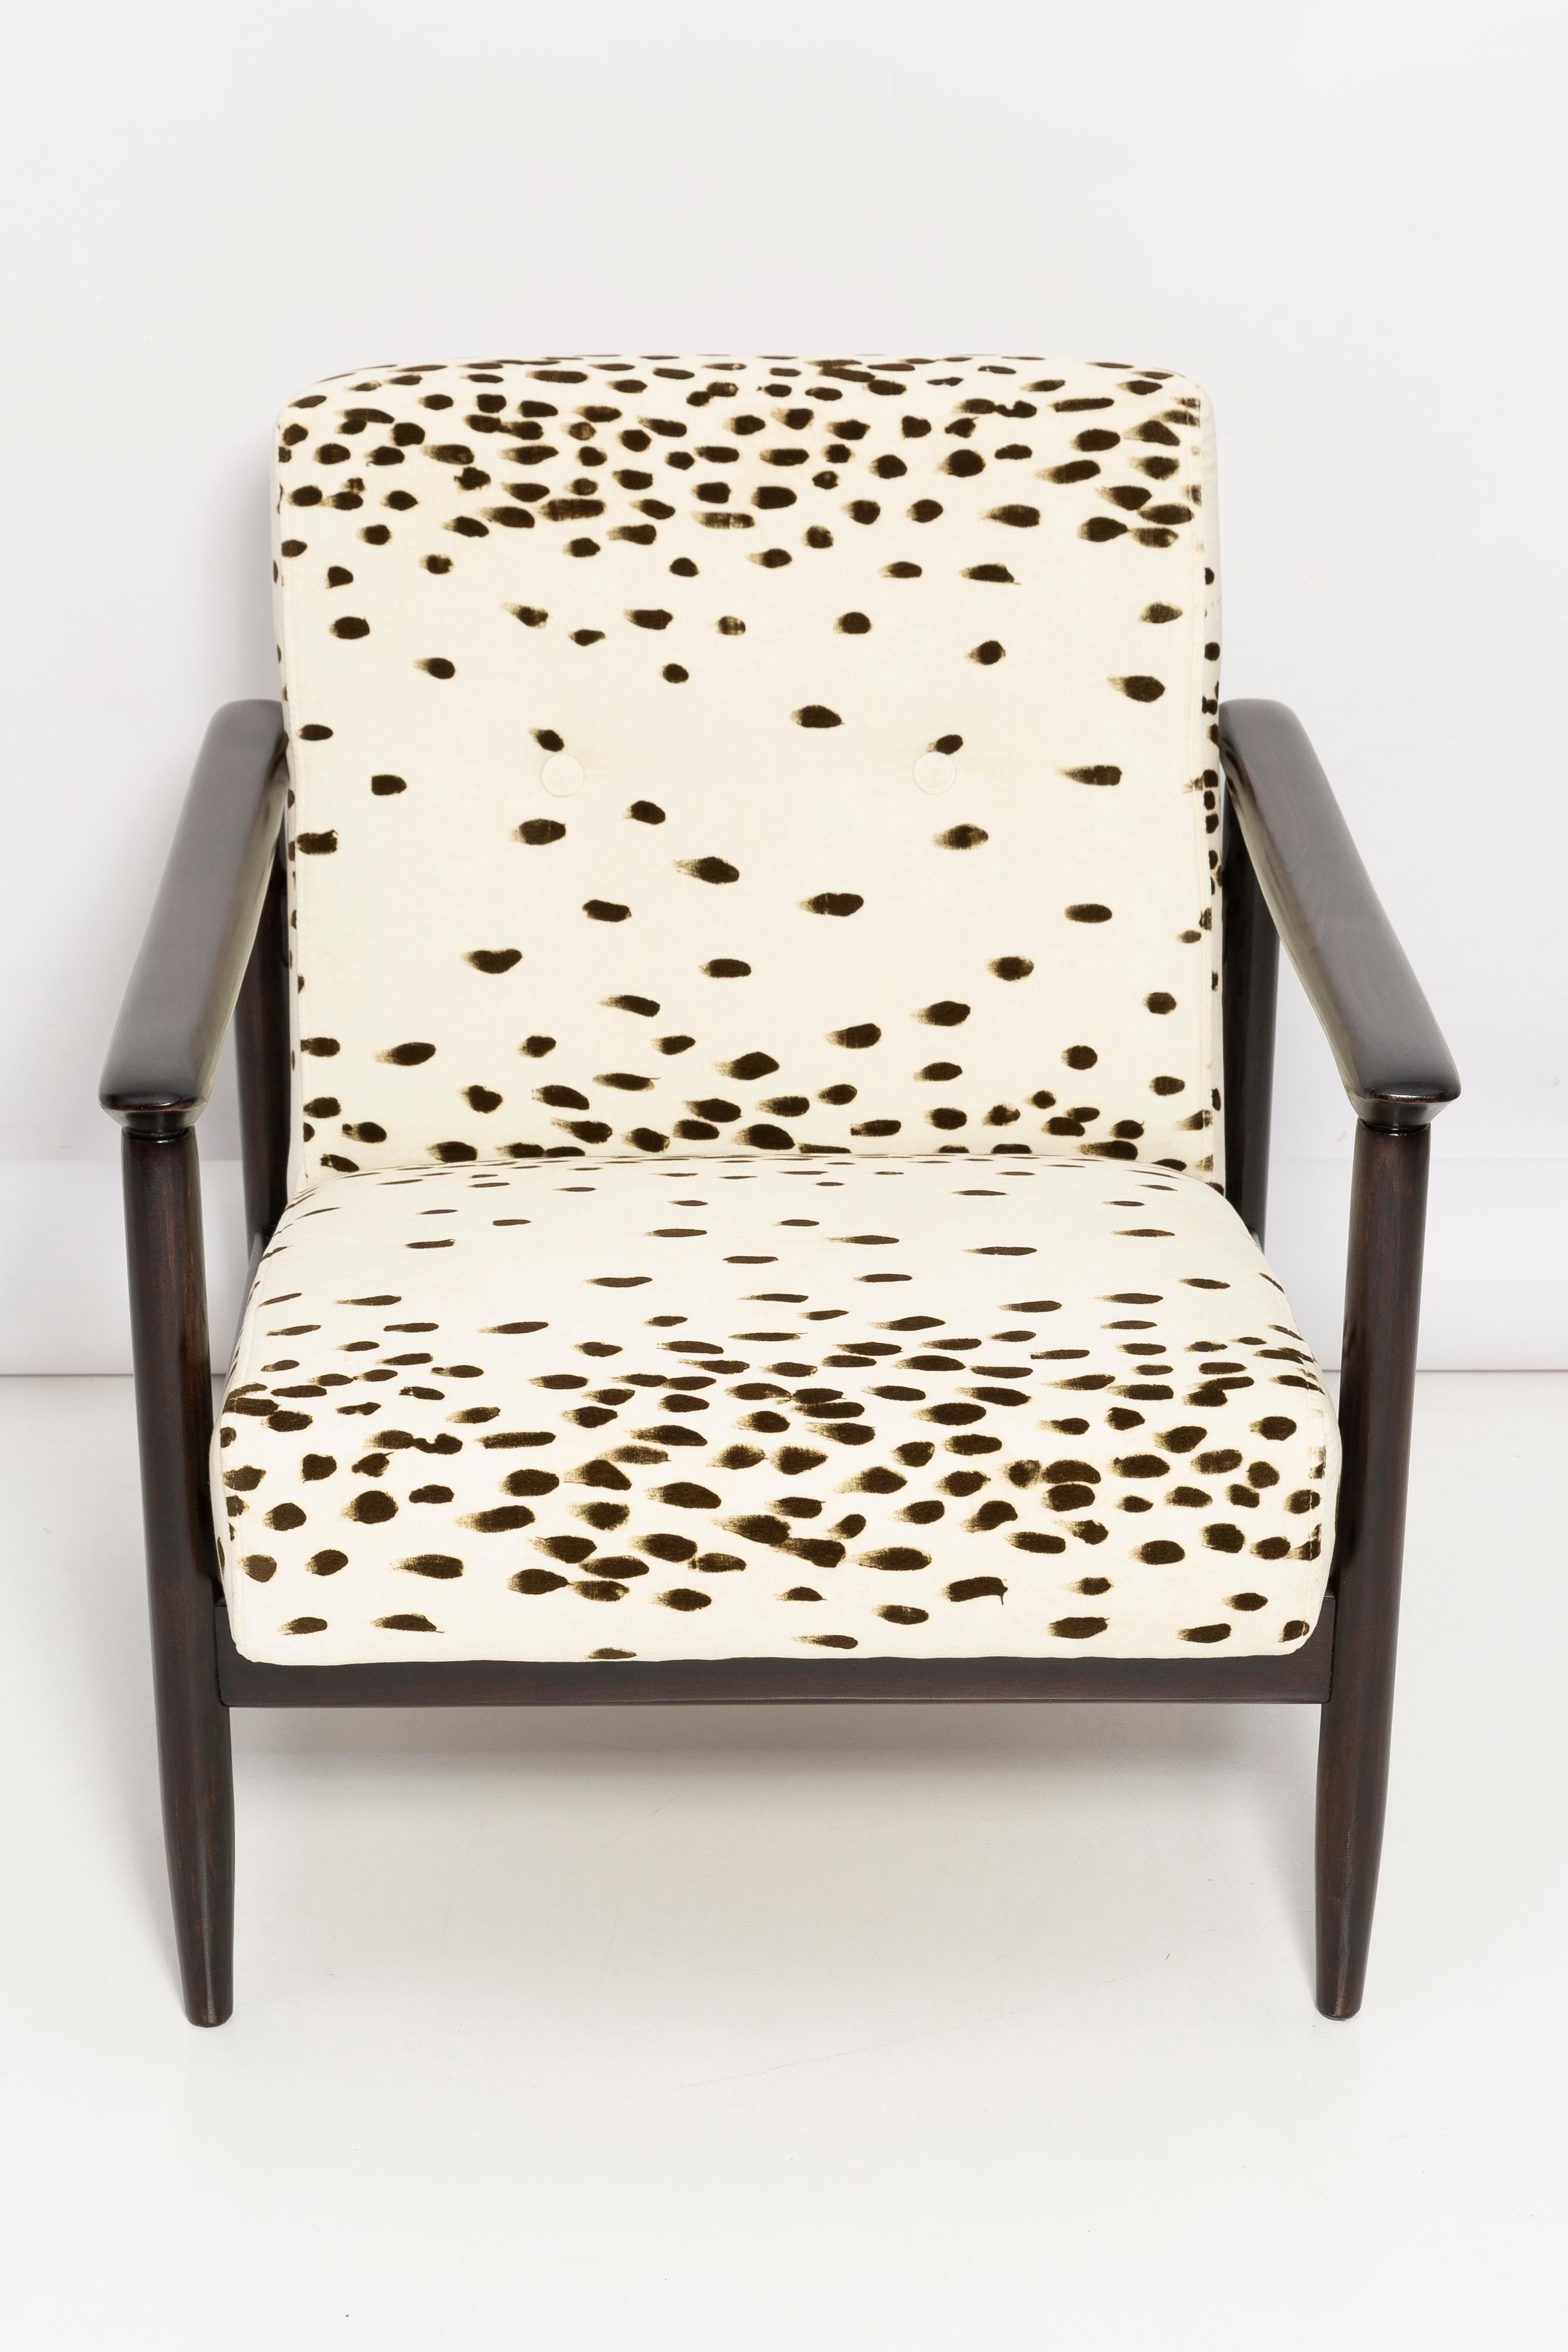 Set of Two Mid Century Dalmatian Velvet Armchairs, by Edmund Homa, Europe, 1960s For Sale 4